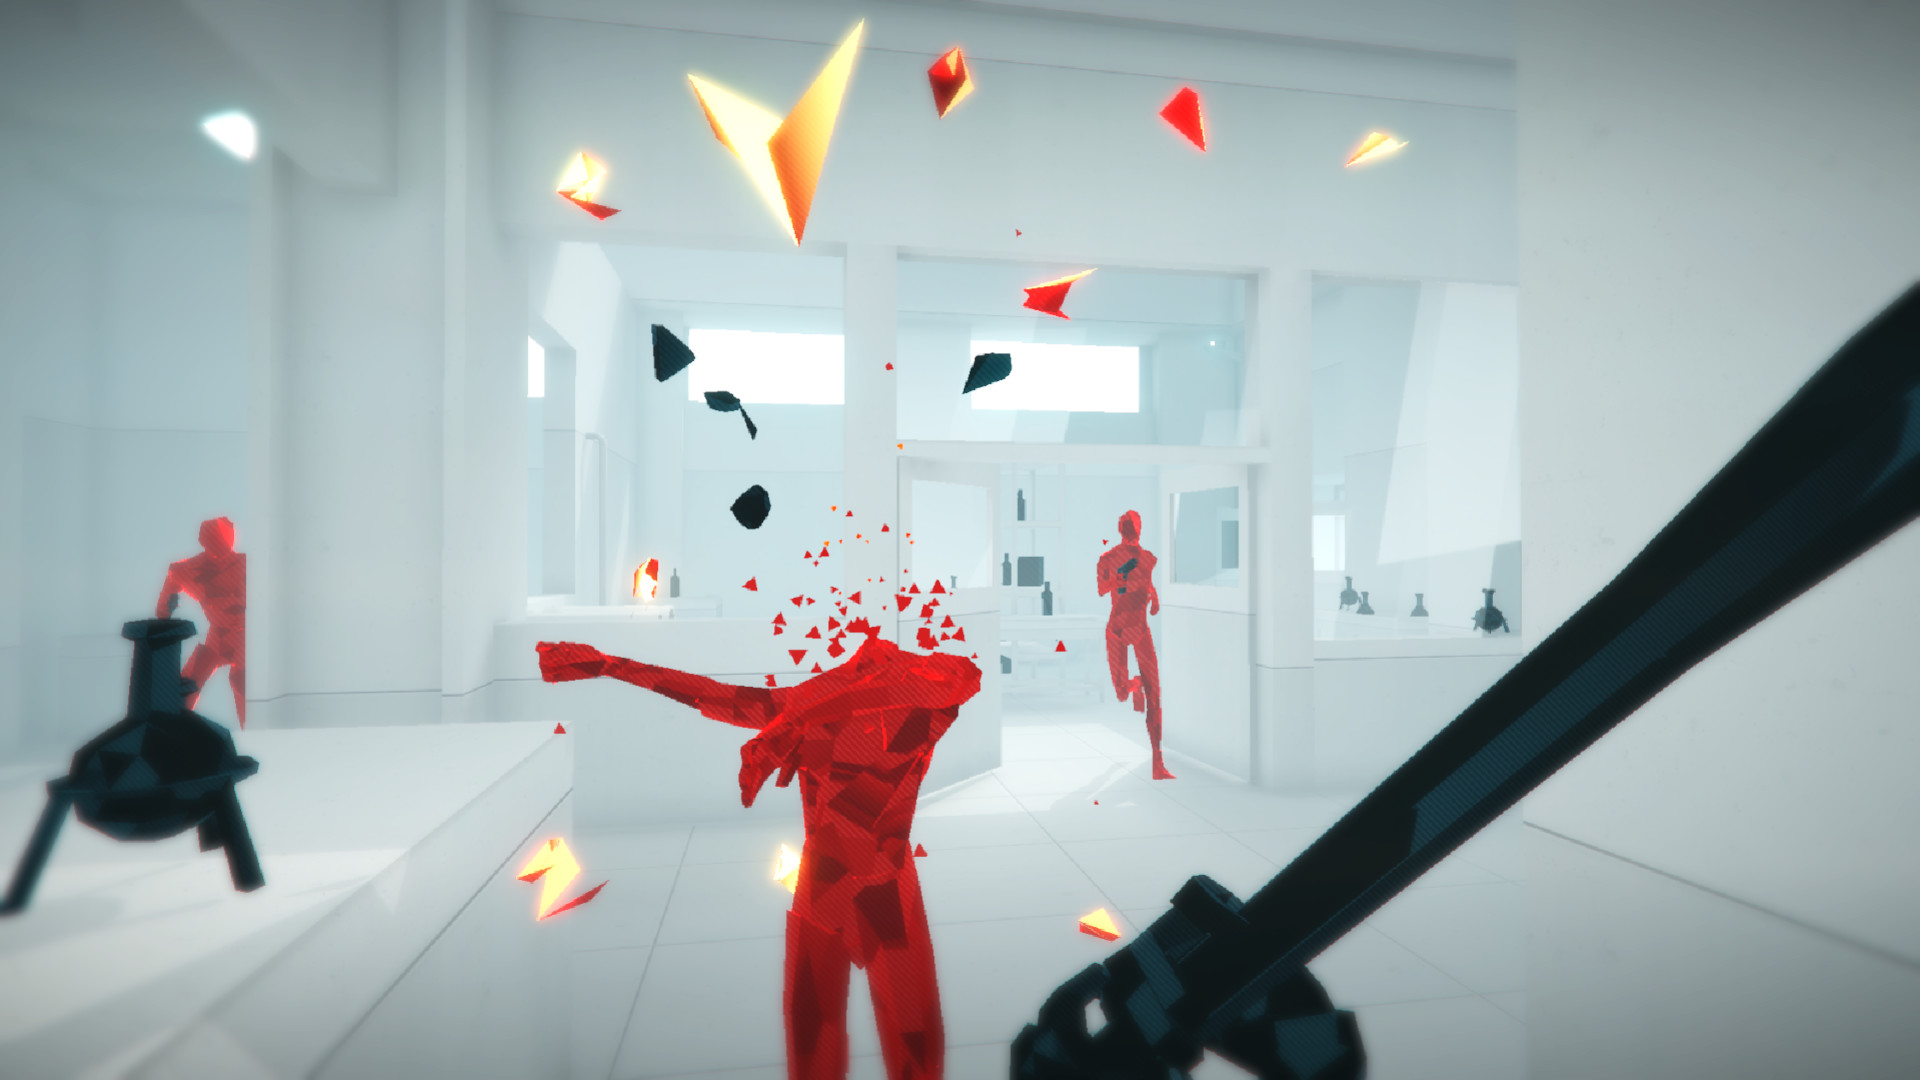 Twitch Prime members, get ready to bend time in SUPERHOT!